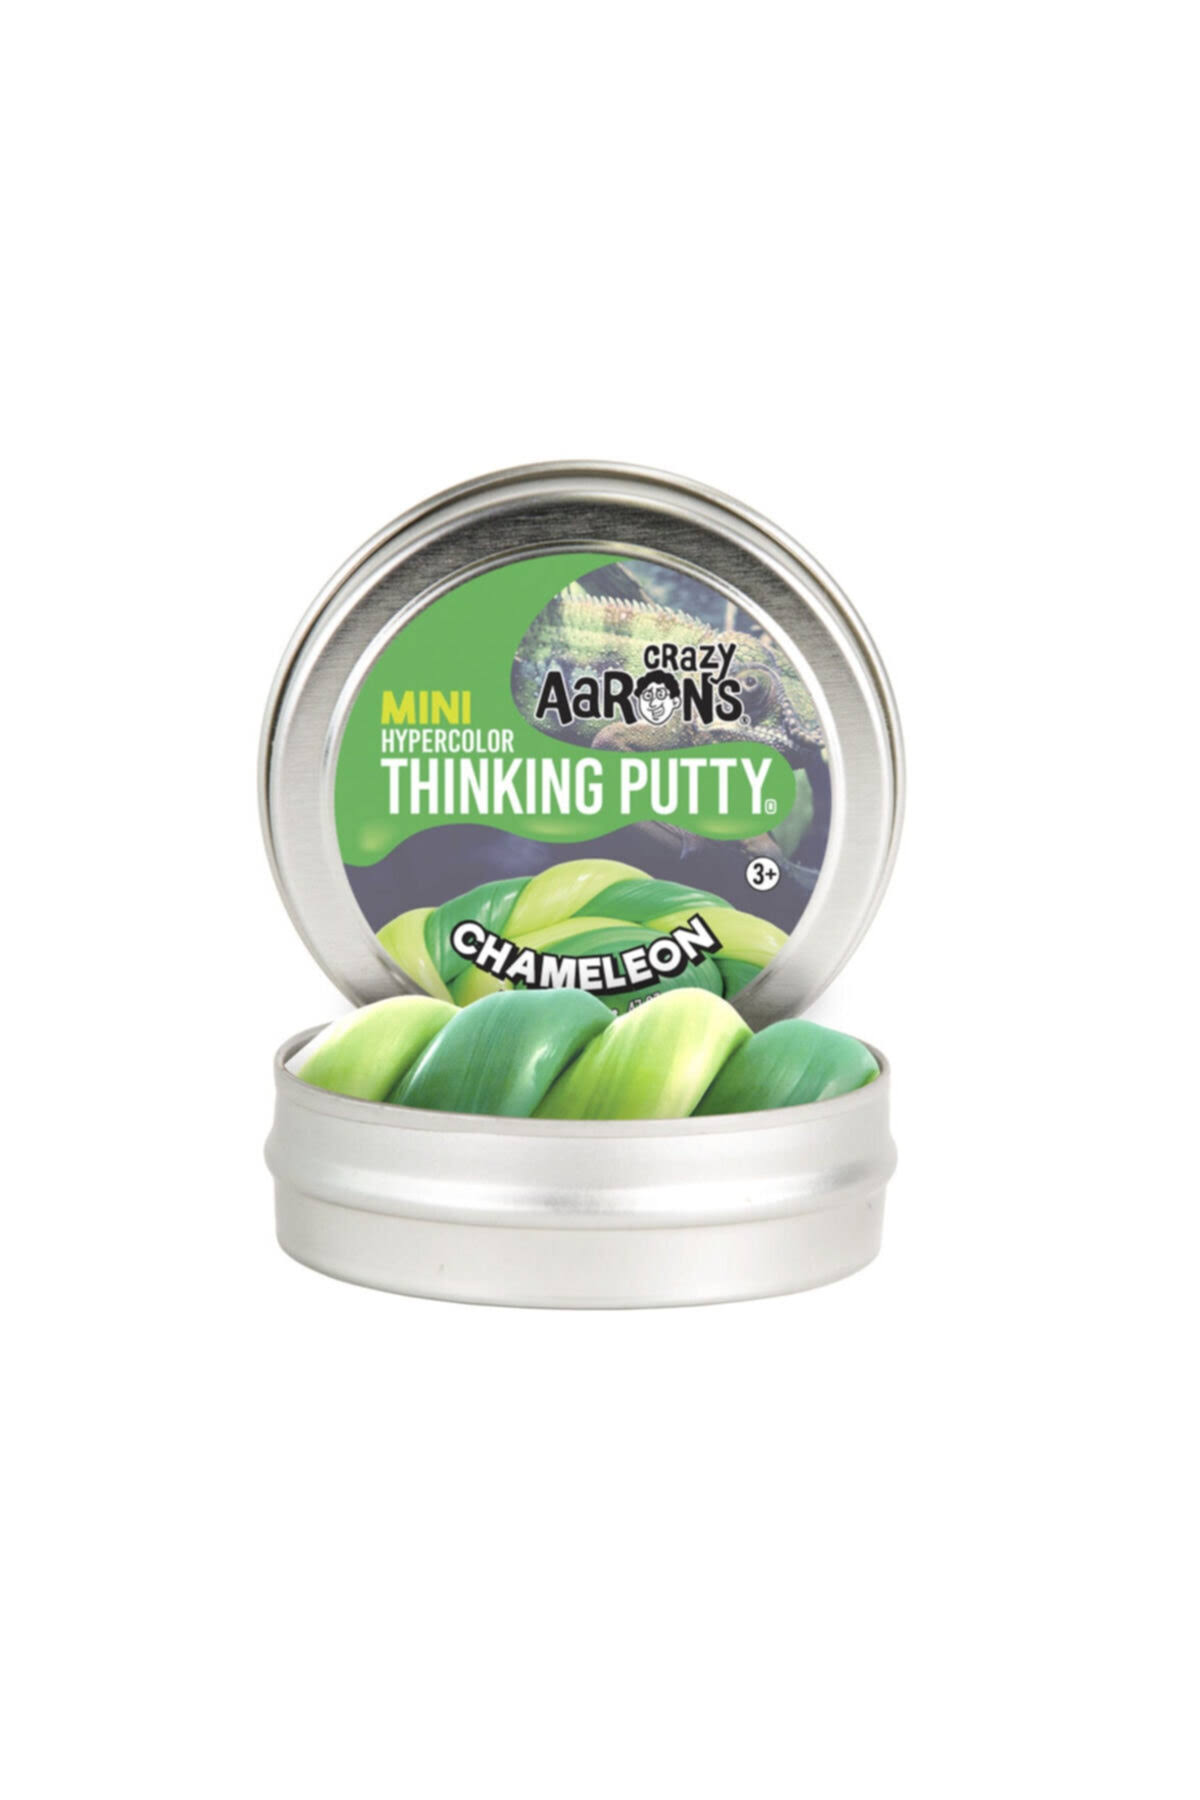 Crazy Aarons Thinking Putty | Chameleon | 2" Tin